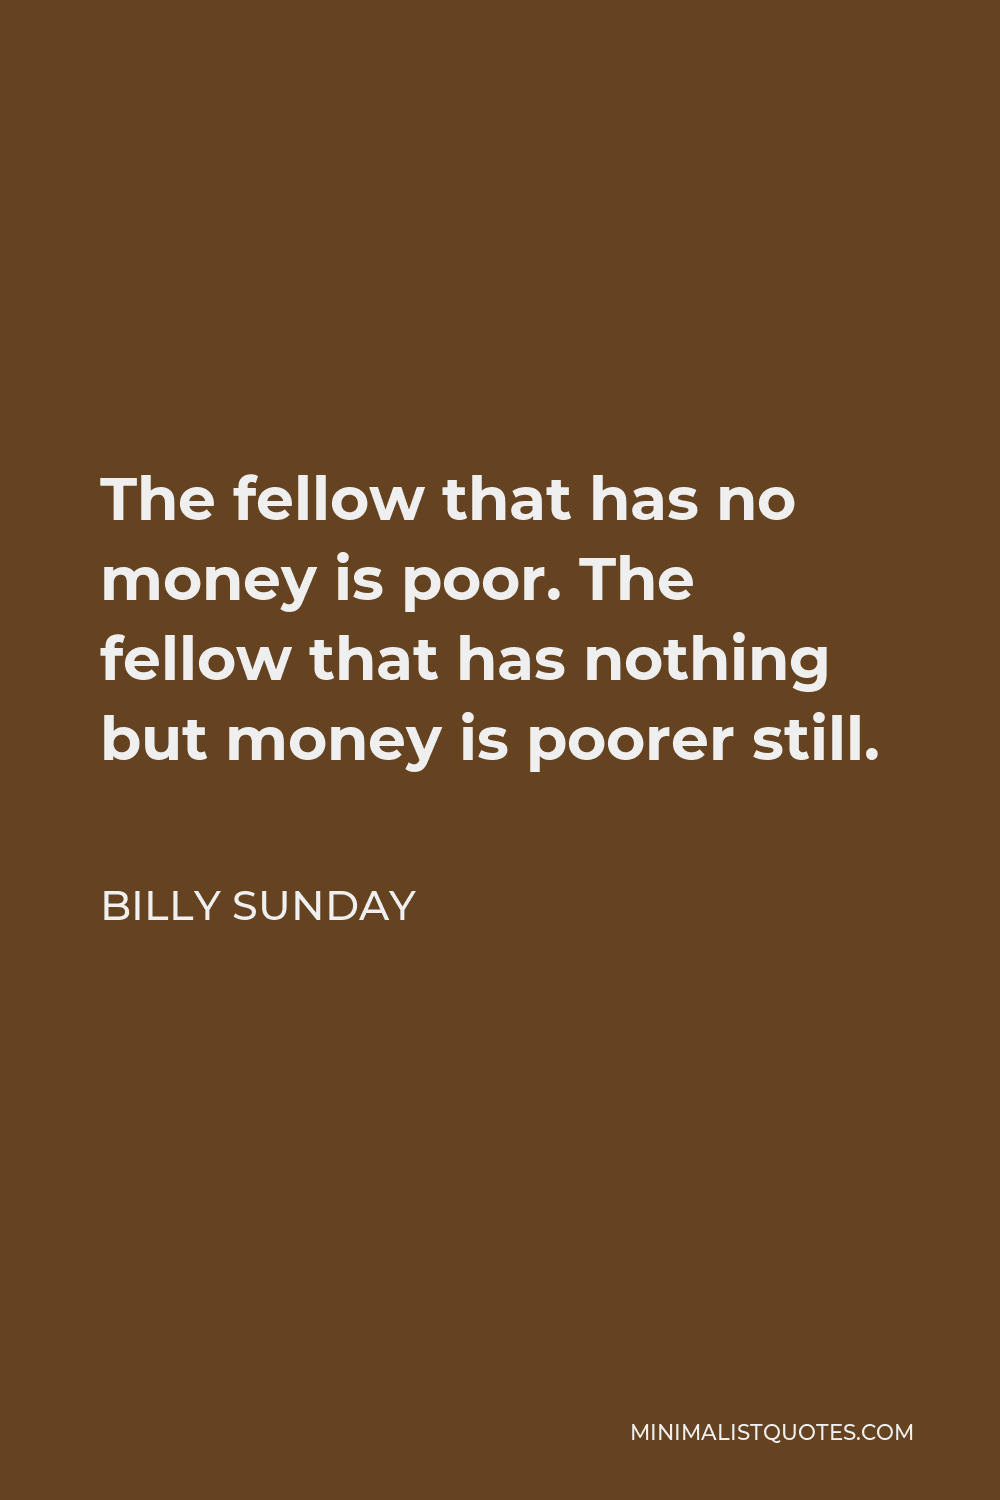 Billy Sunday Quote - The fellow that has no money is poor. The fellow that has nothing but money is poorer still.